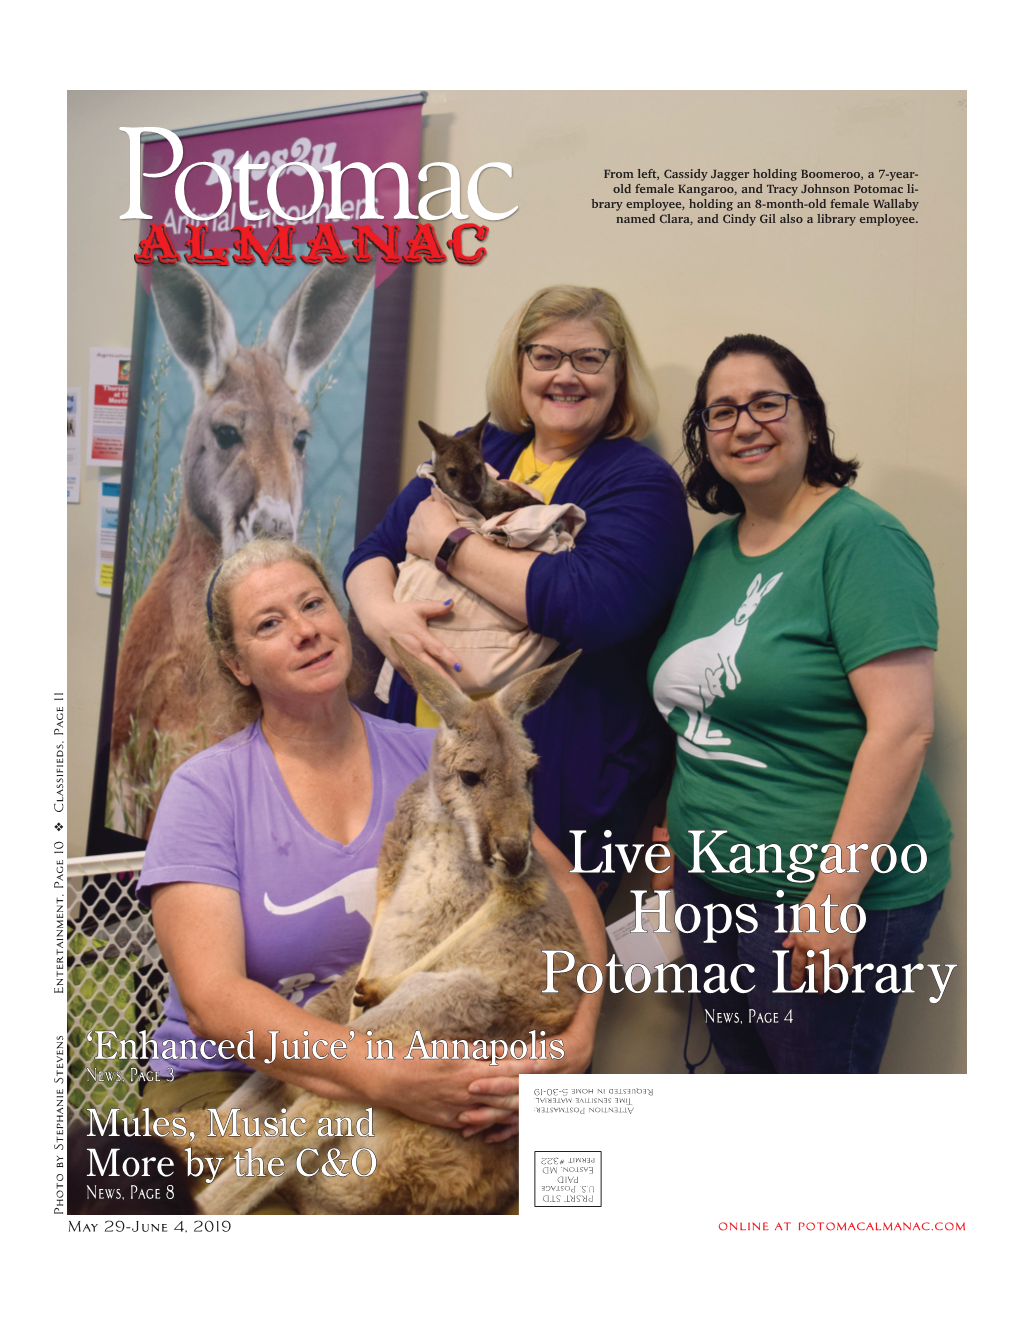 Live Kangaroo Hops Into Potomac Library Friends of the Library Potomac Chapter Sponsors Unusual Animal Encounter